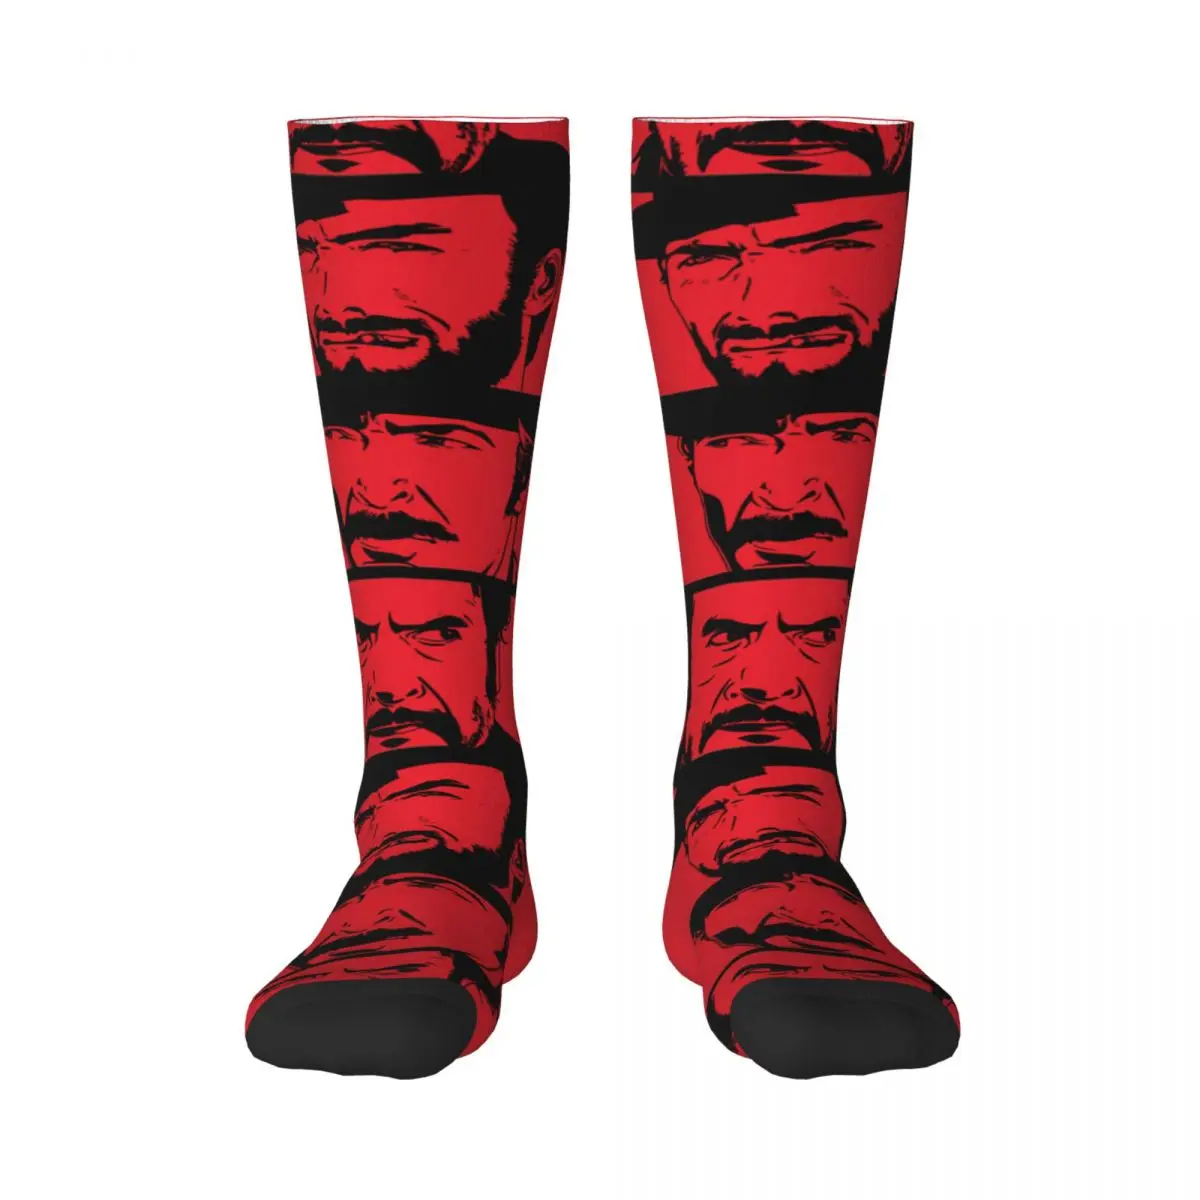 

Hot Sale Captain Tsubasa The Good The Bad The Ugly 10 Adult Stockings Good breathability INS style Elastic Stockings Nerd